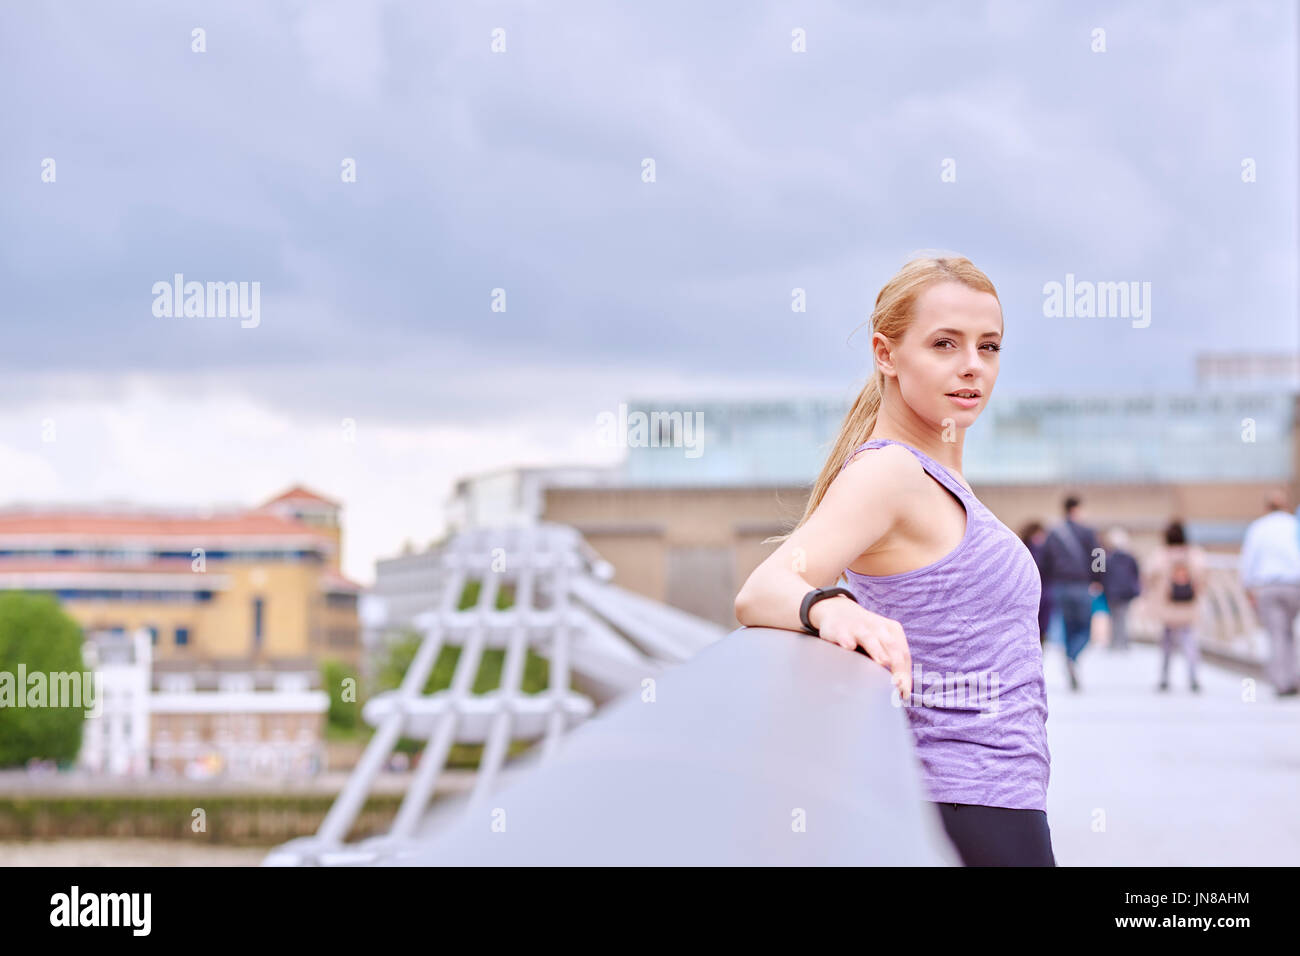 A young woman stops to relax while exercising in the City Stock Photo